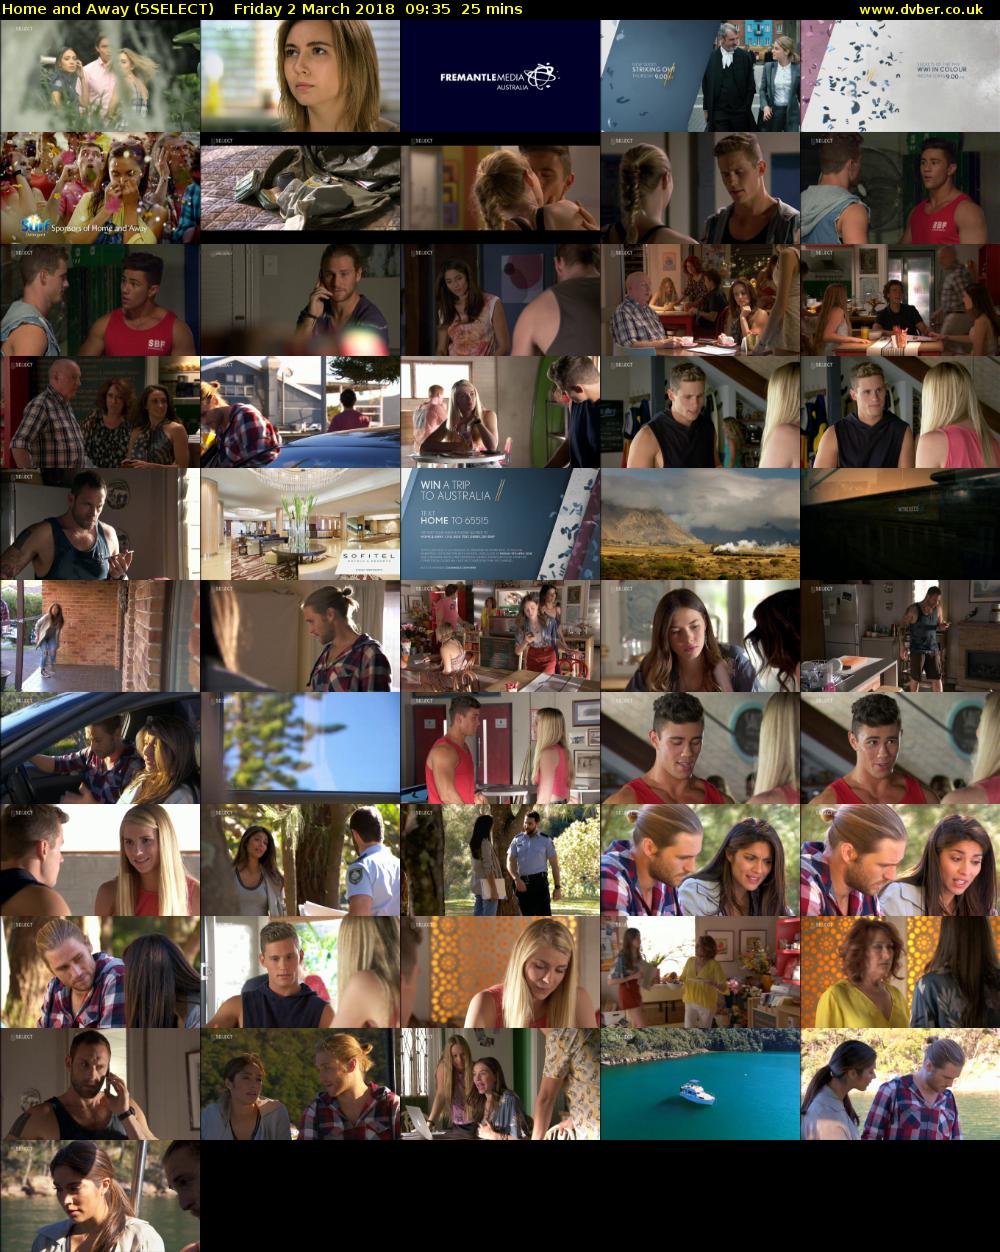 Home and Away (5SELECT) Friday 2 March 2018 09:35 - 10:00